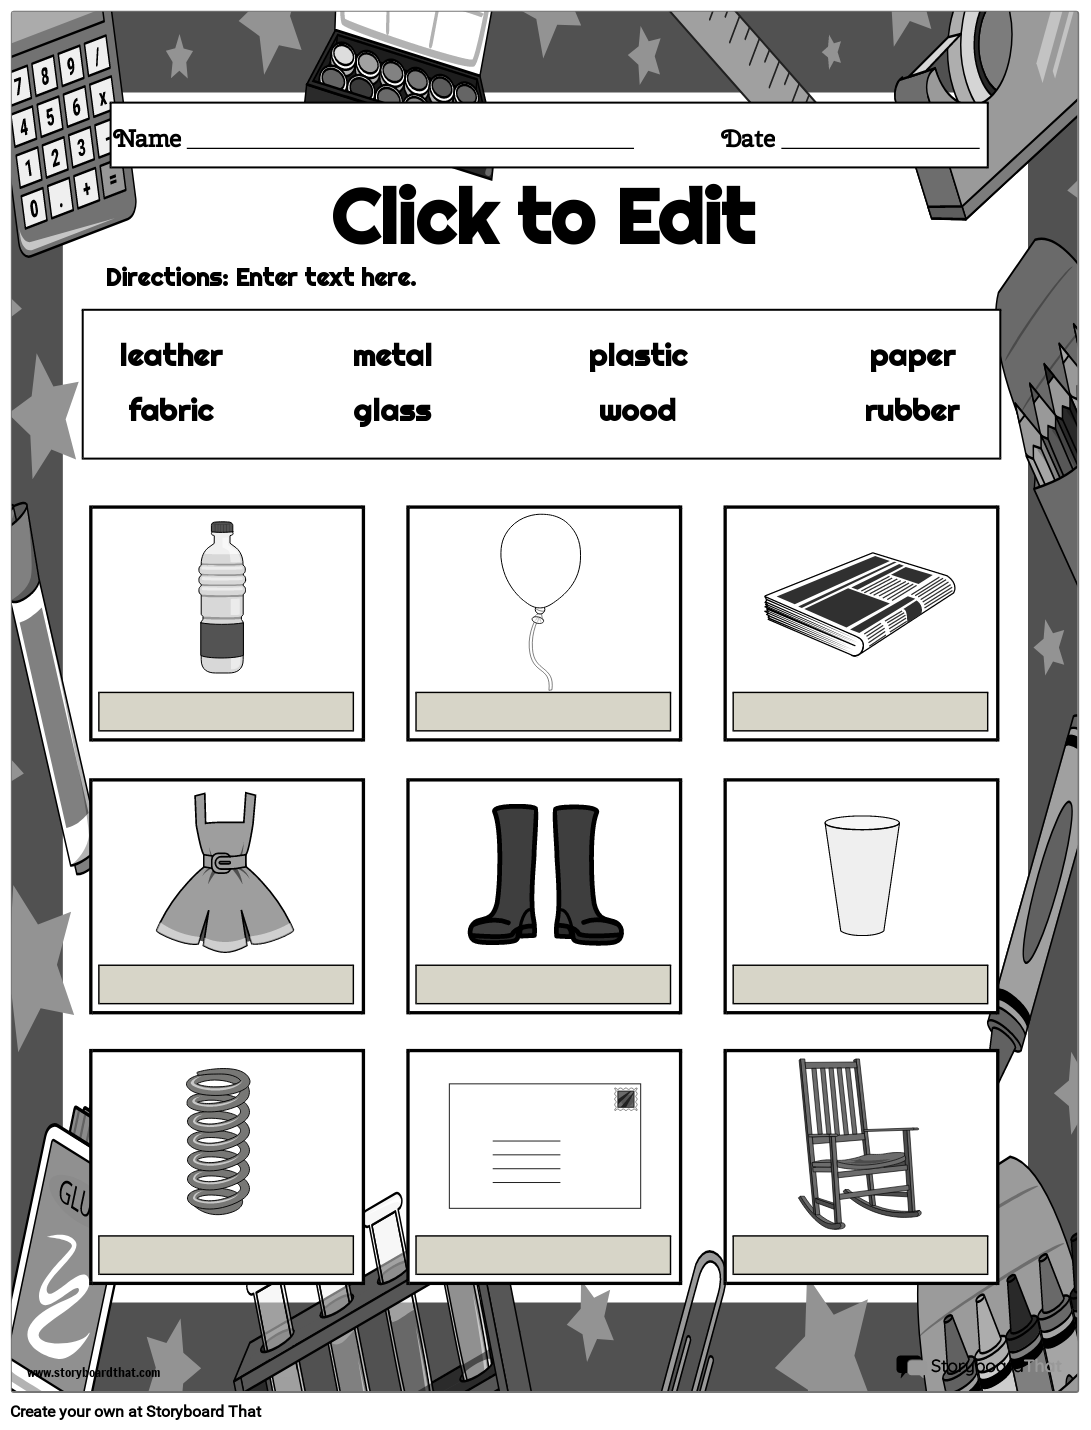 Example of Minerals and Properties Worksheet with Classroom Things B&W